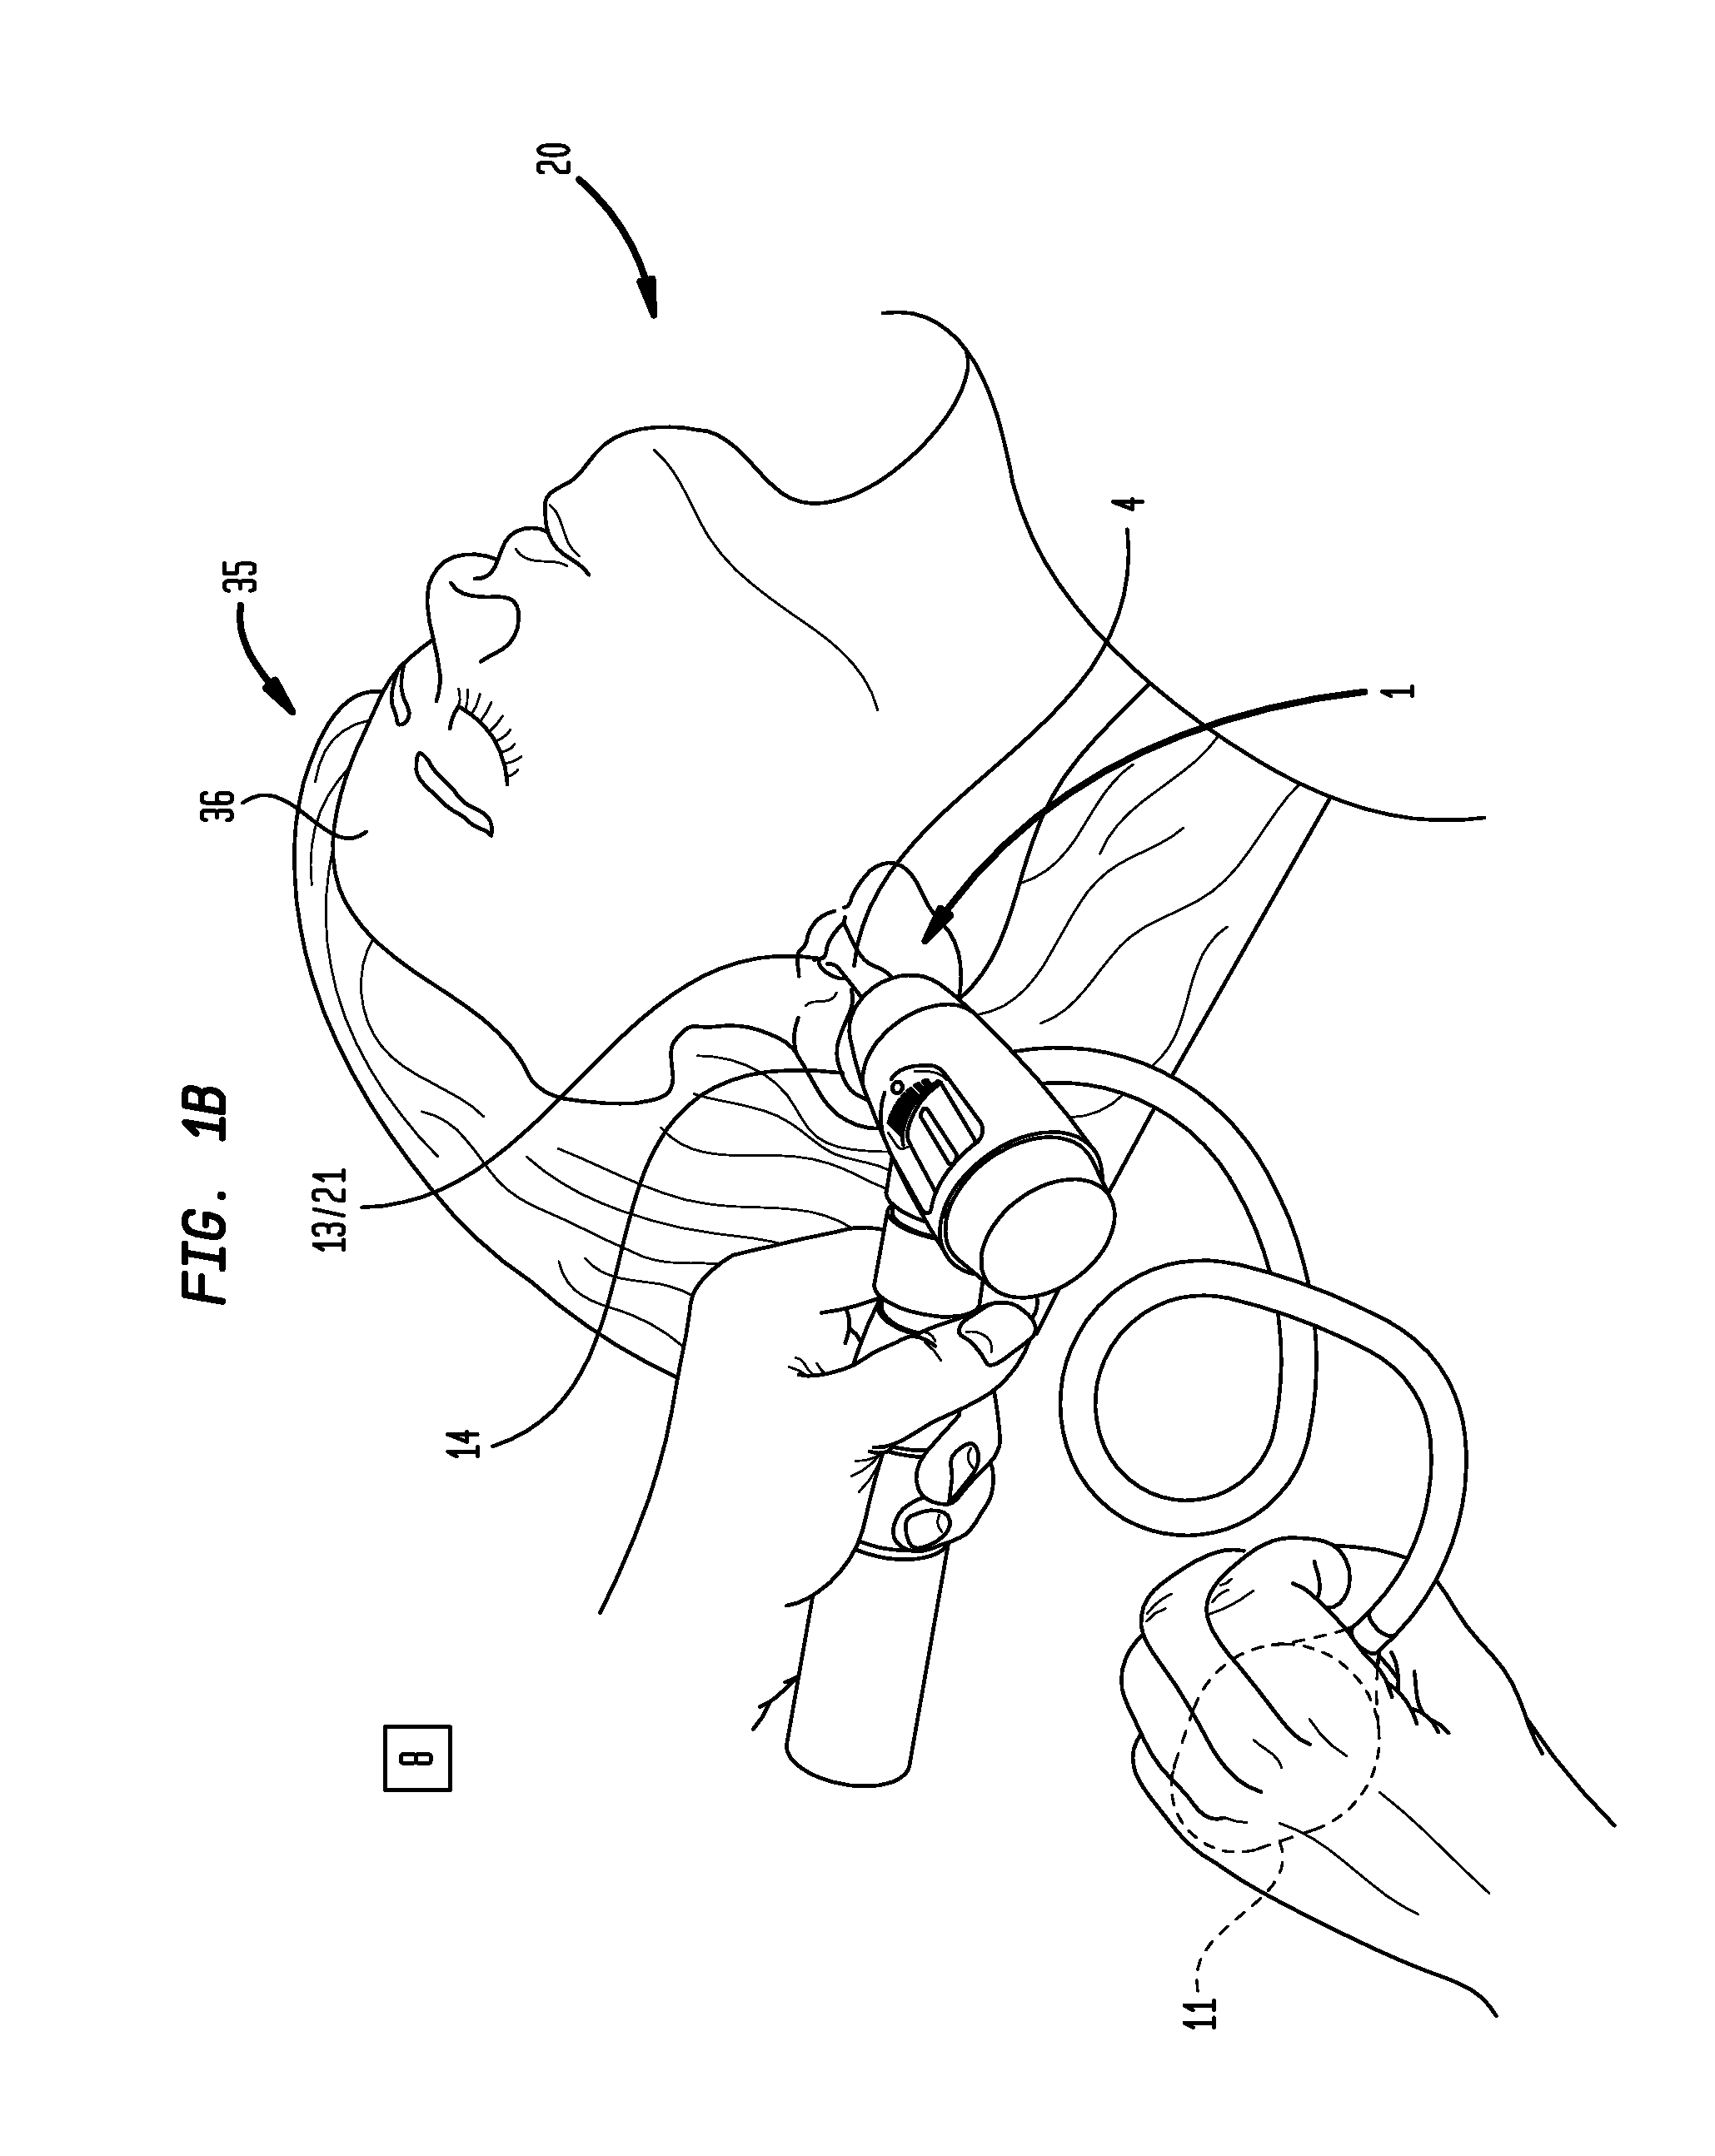 Method For External Ear Canal Pressure Regulation To Alleviate Disorder Symptoms